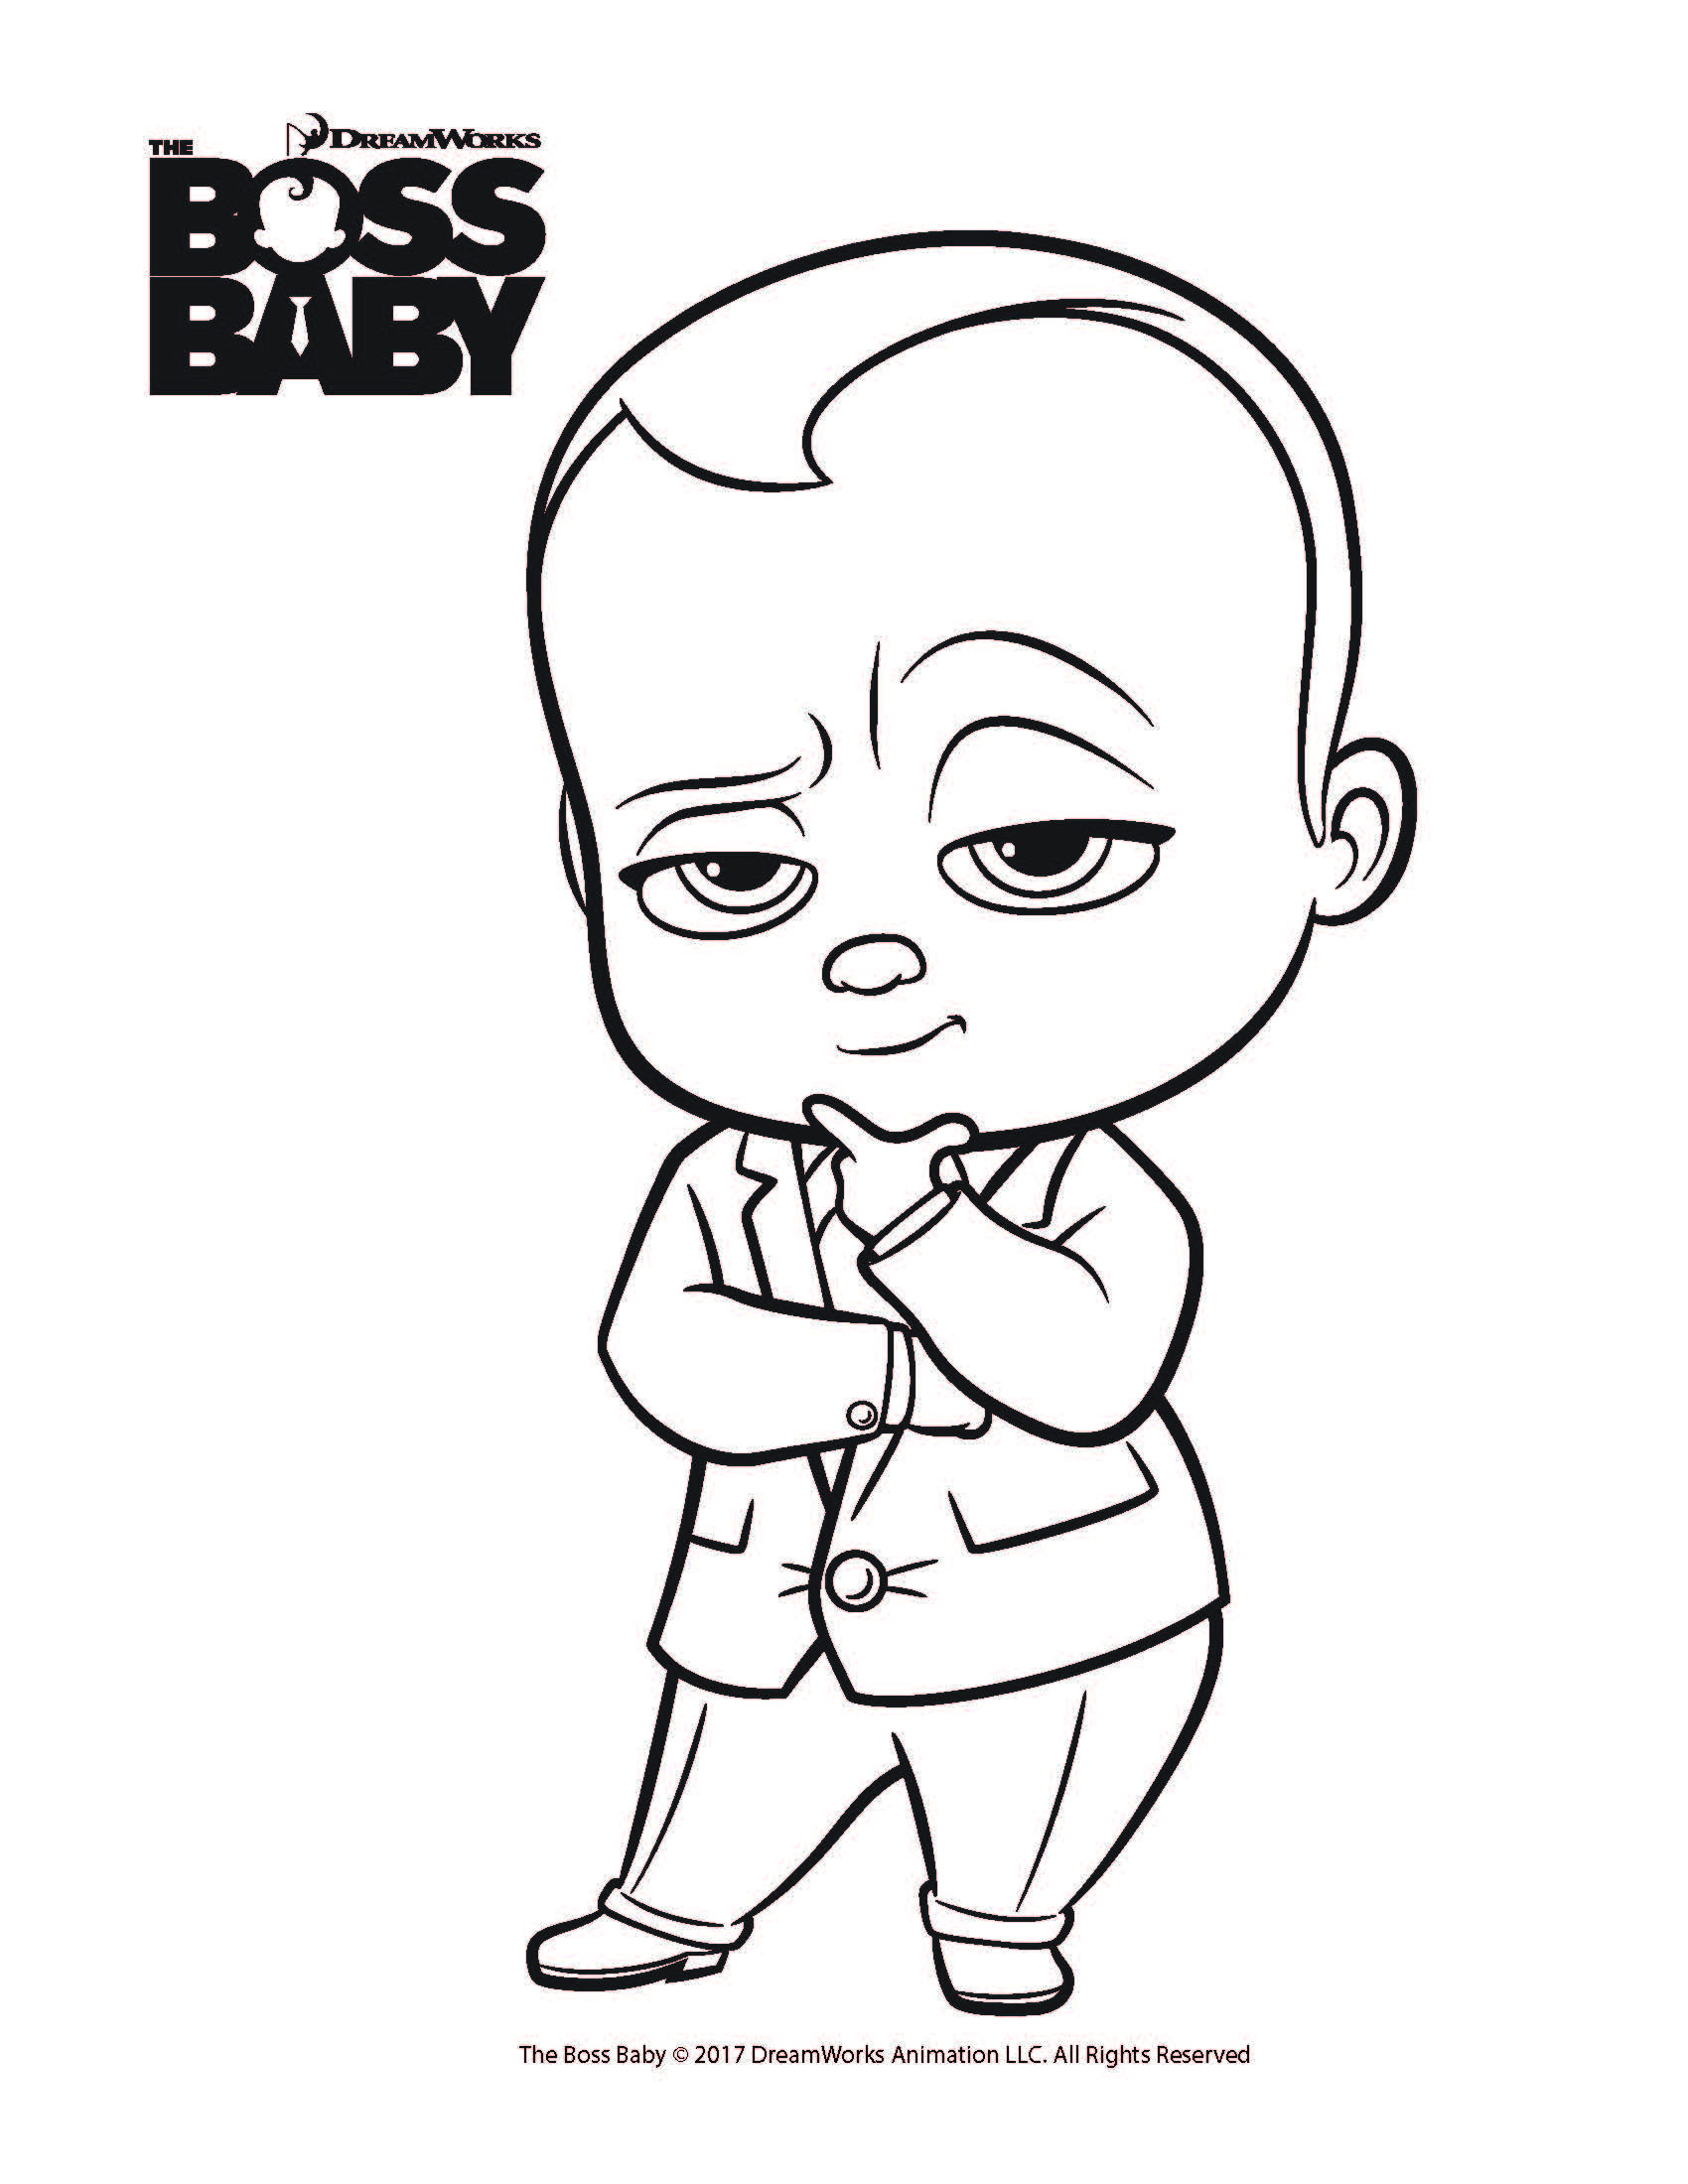 Boss Baby Coloring Page
 Free coloring printables for The Boss Baby from Dreamworks